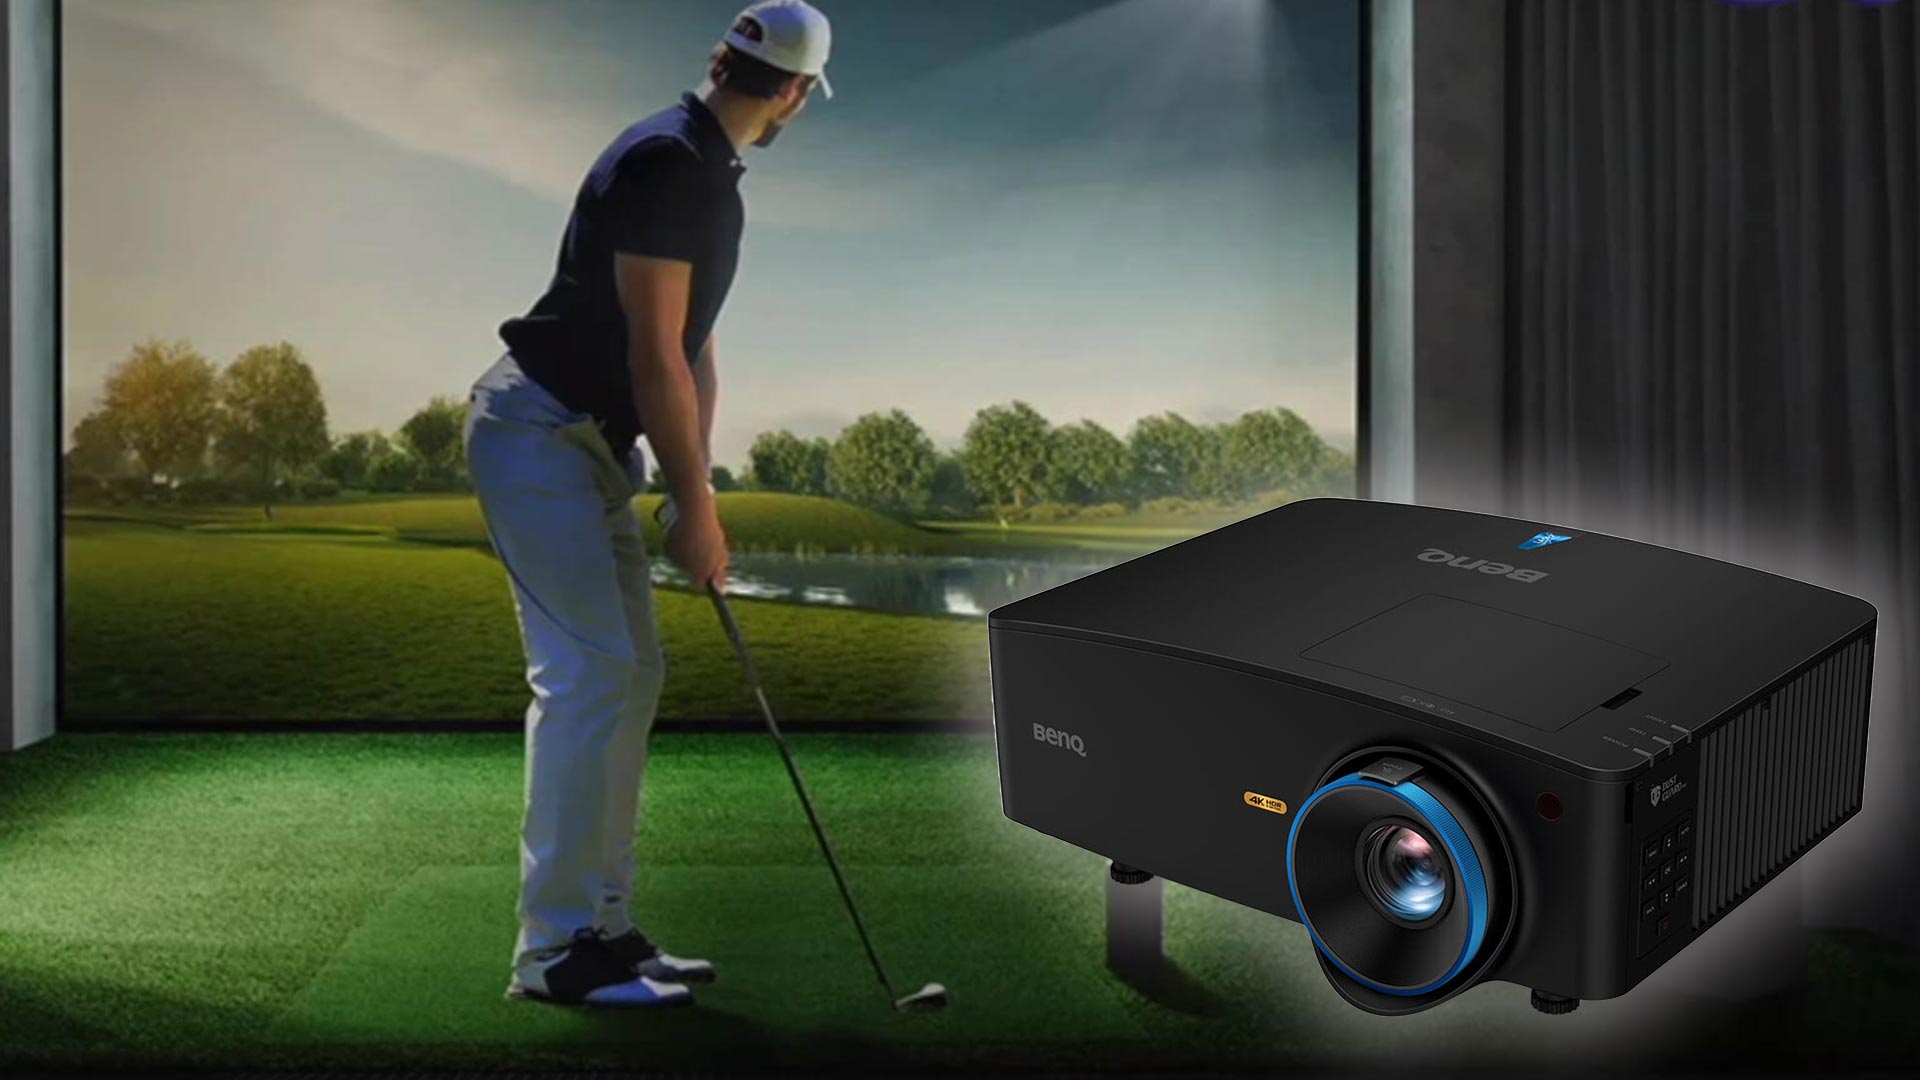 A Dual Use Golf Simulator And Home Entertainment Projector. - Projector Reviews - Image